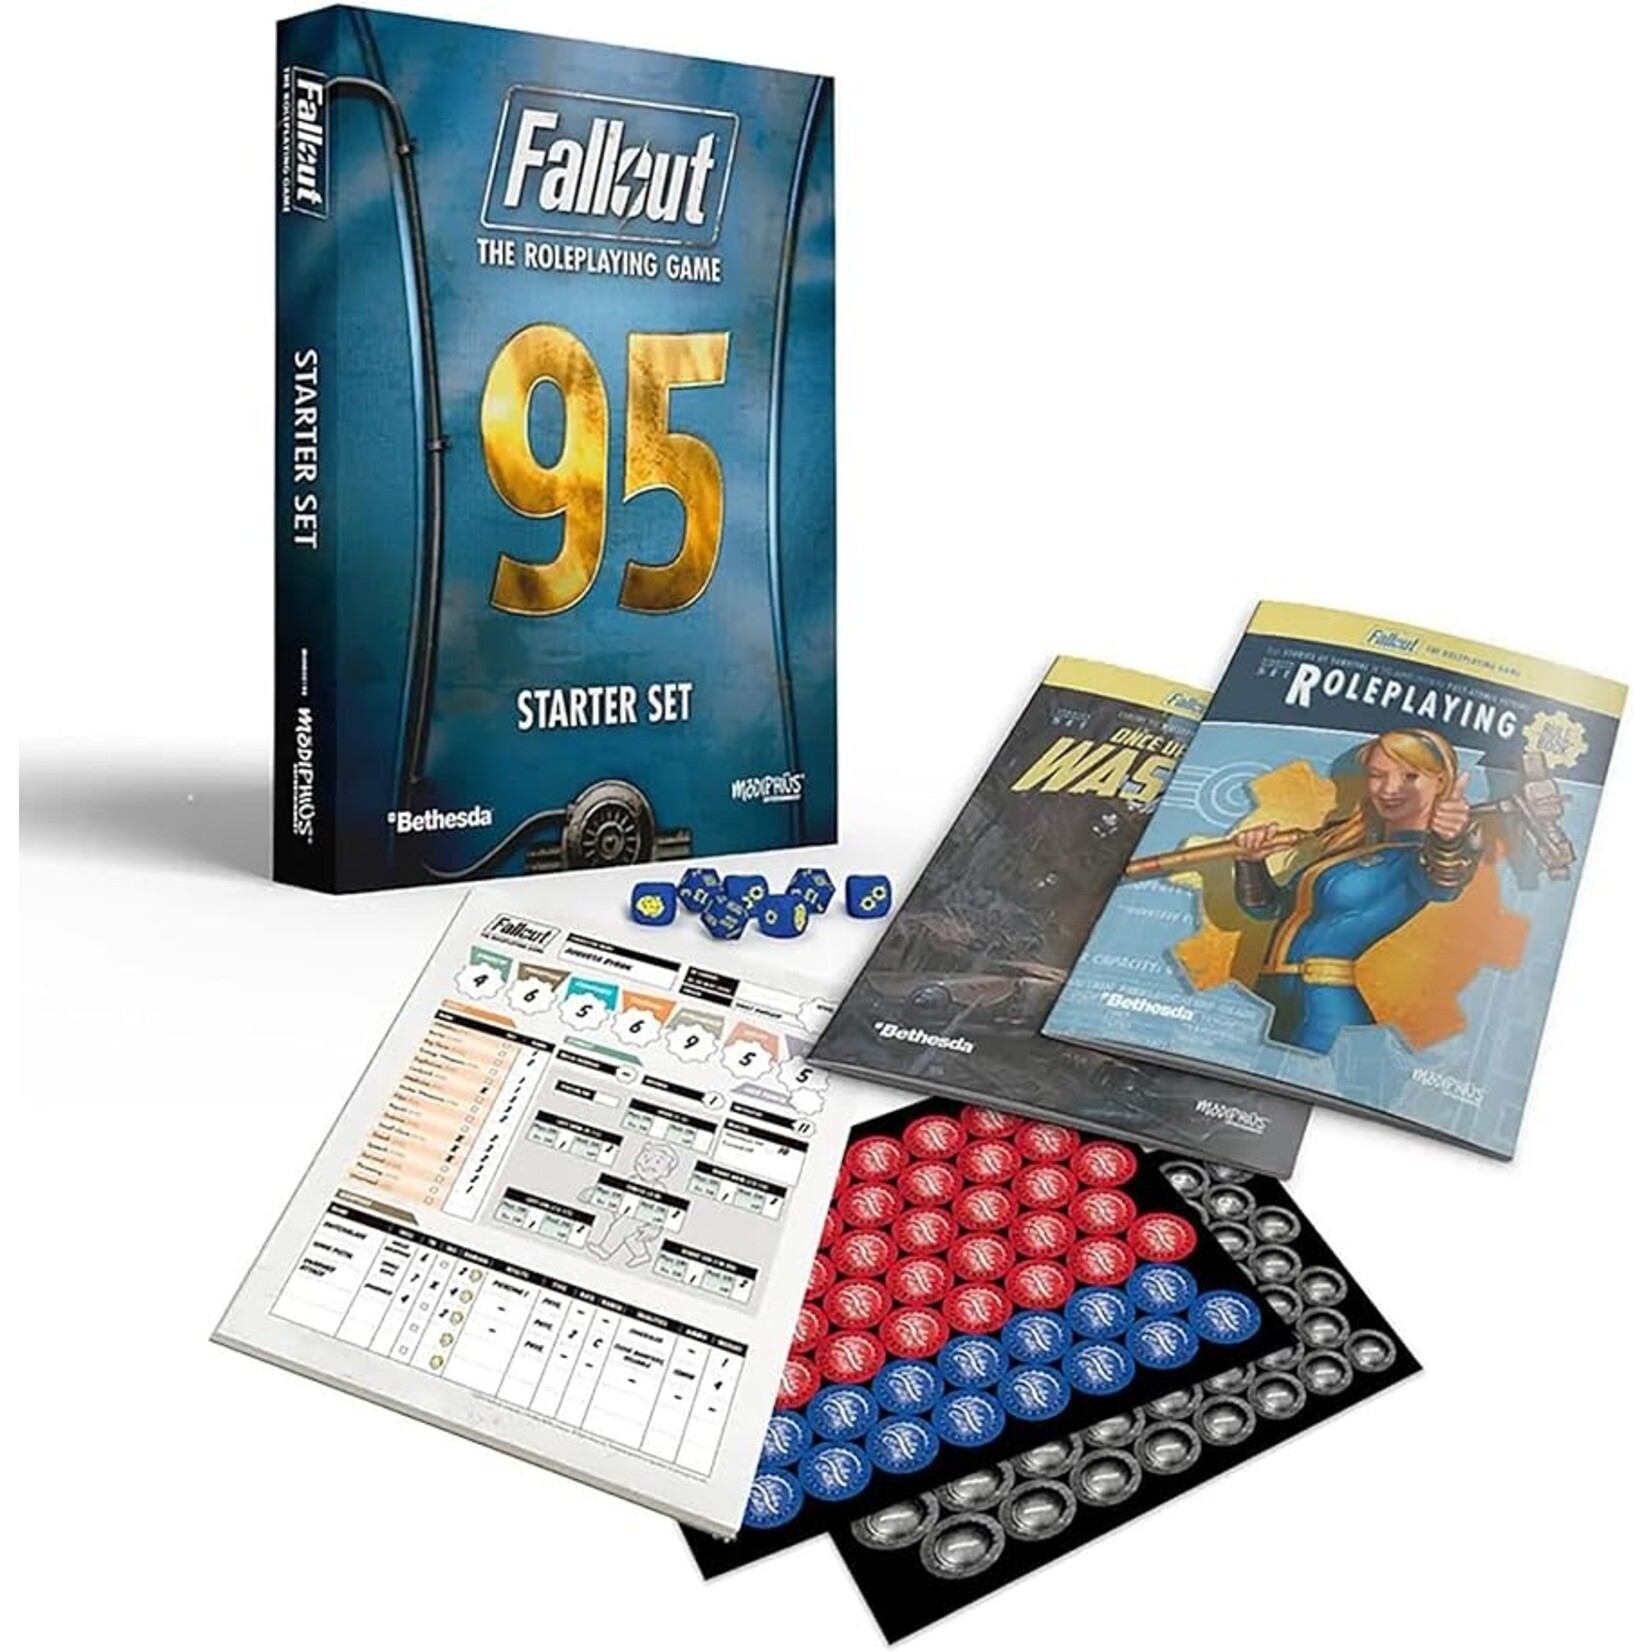 Modiphius Entertainment Fallout The Roleplaying Game Starter Set